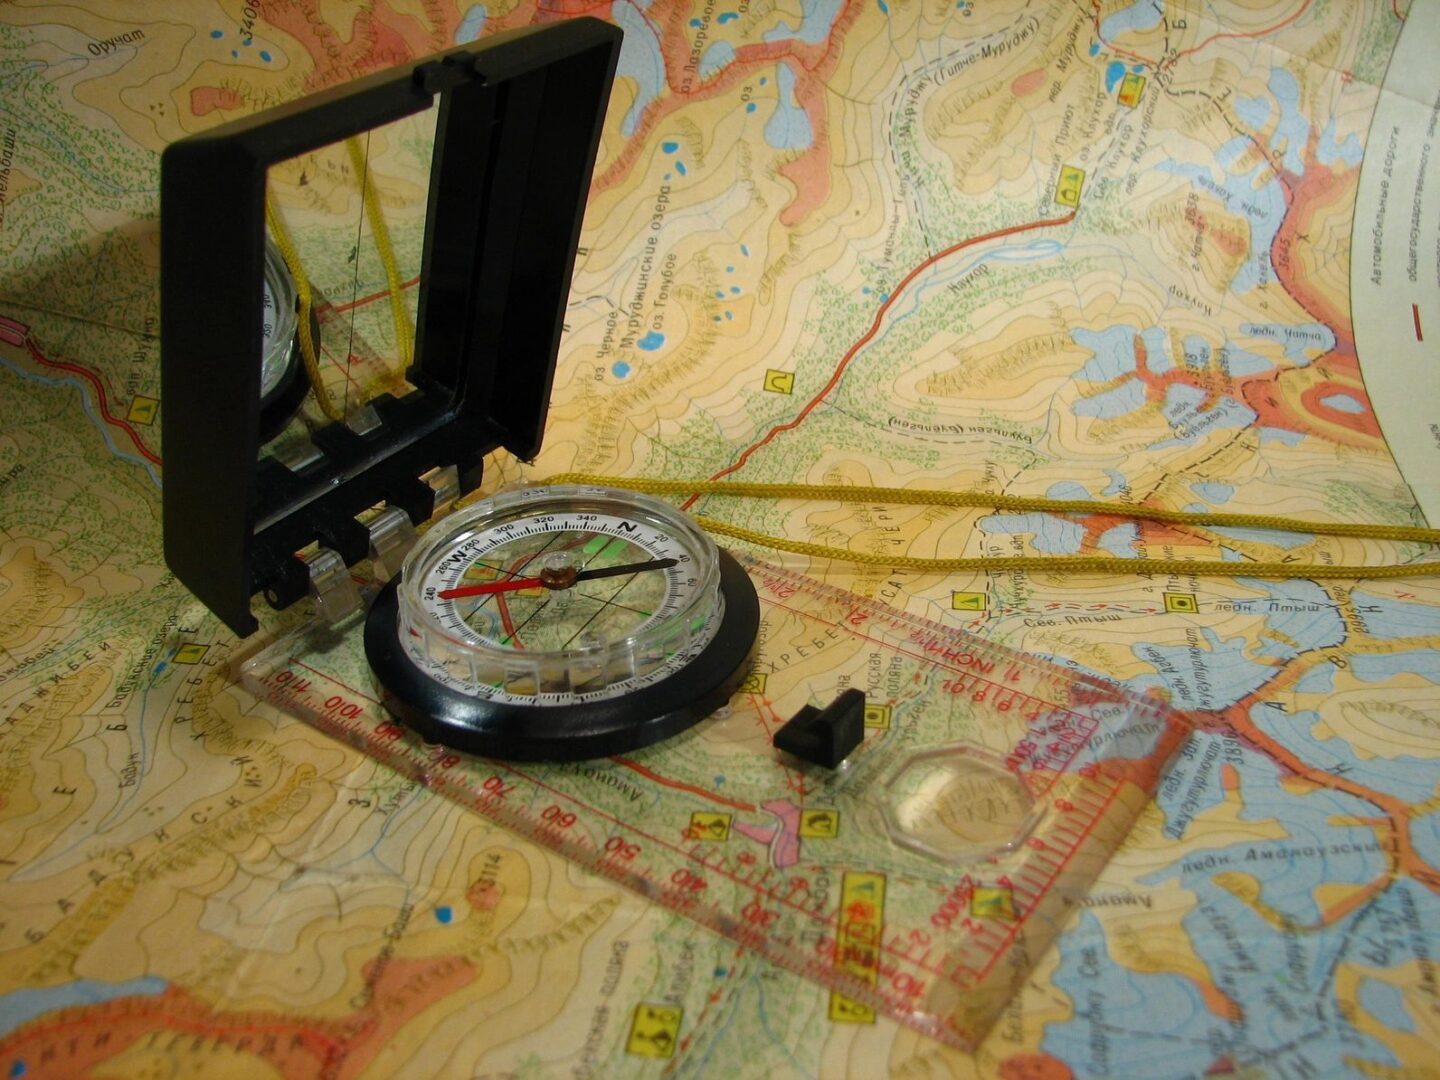 A compass and map on the floor of an area.